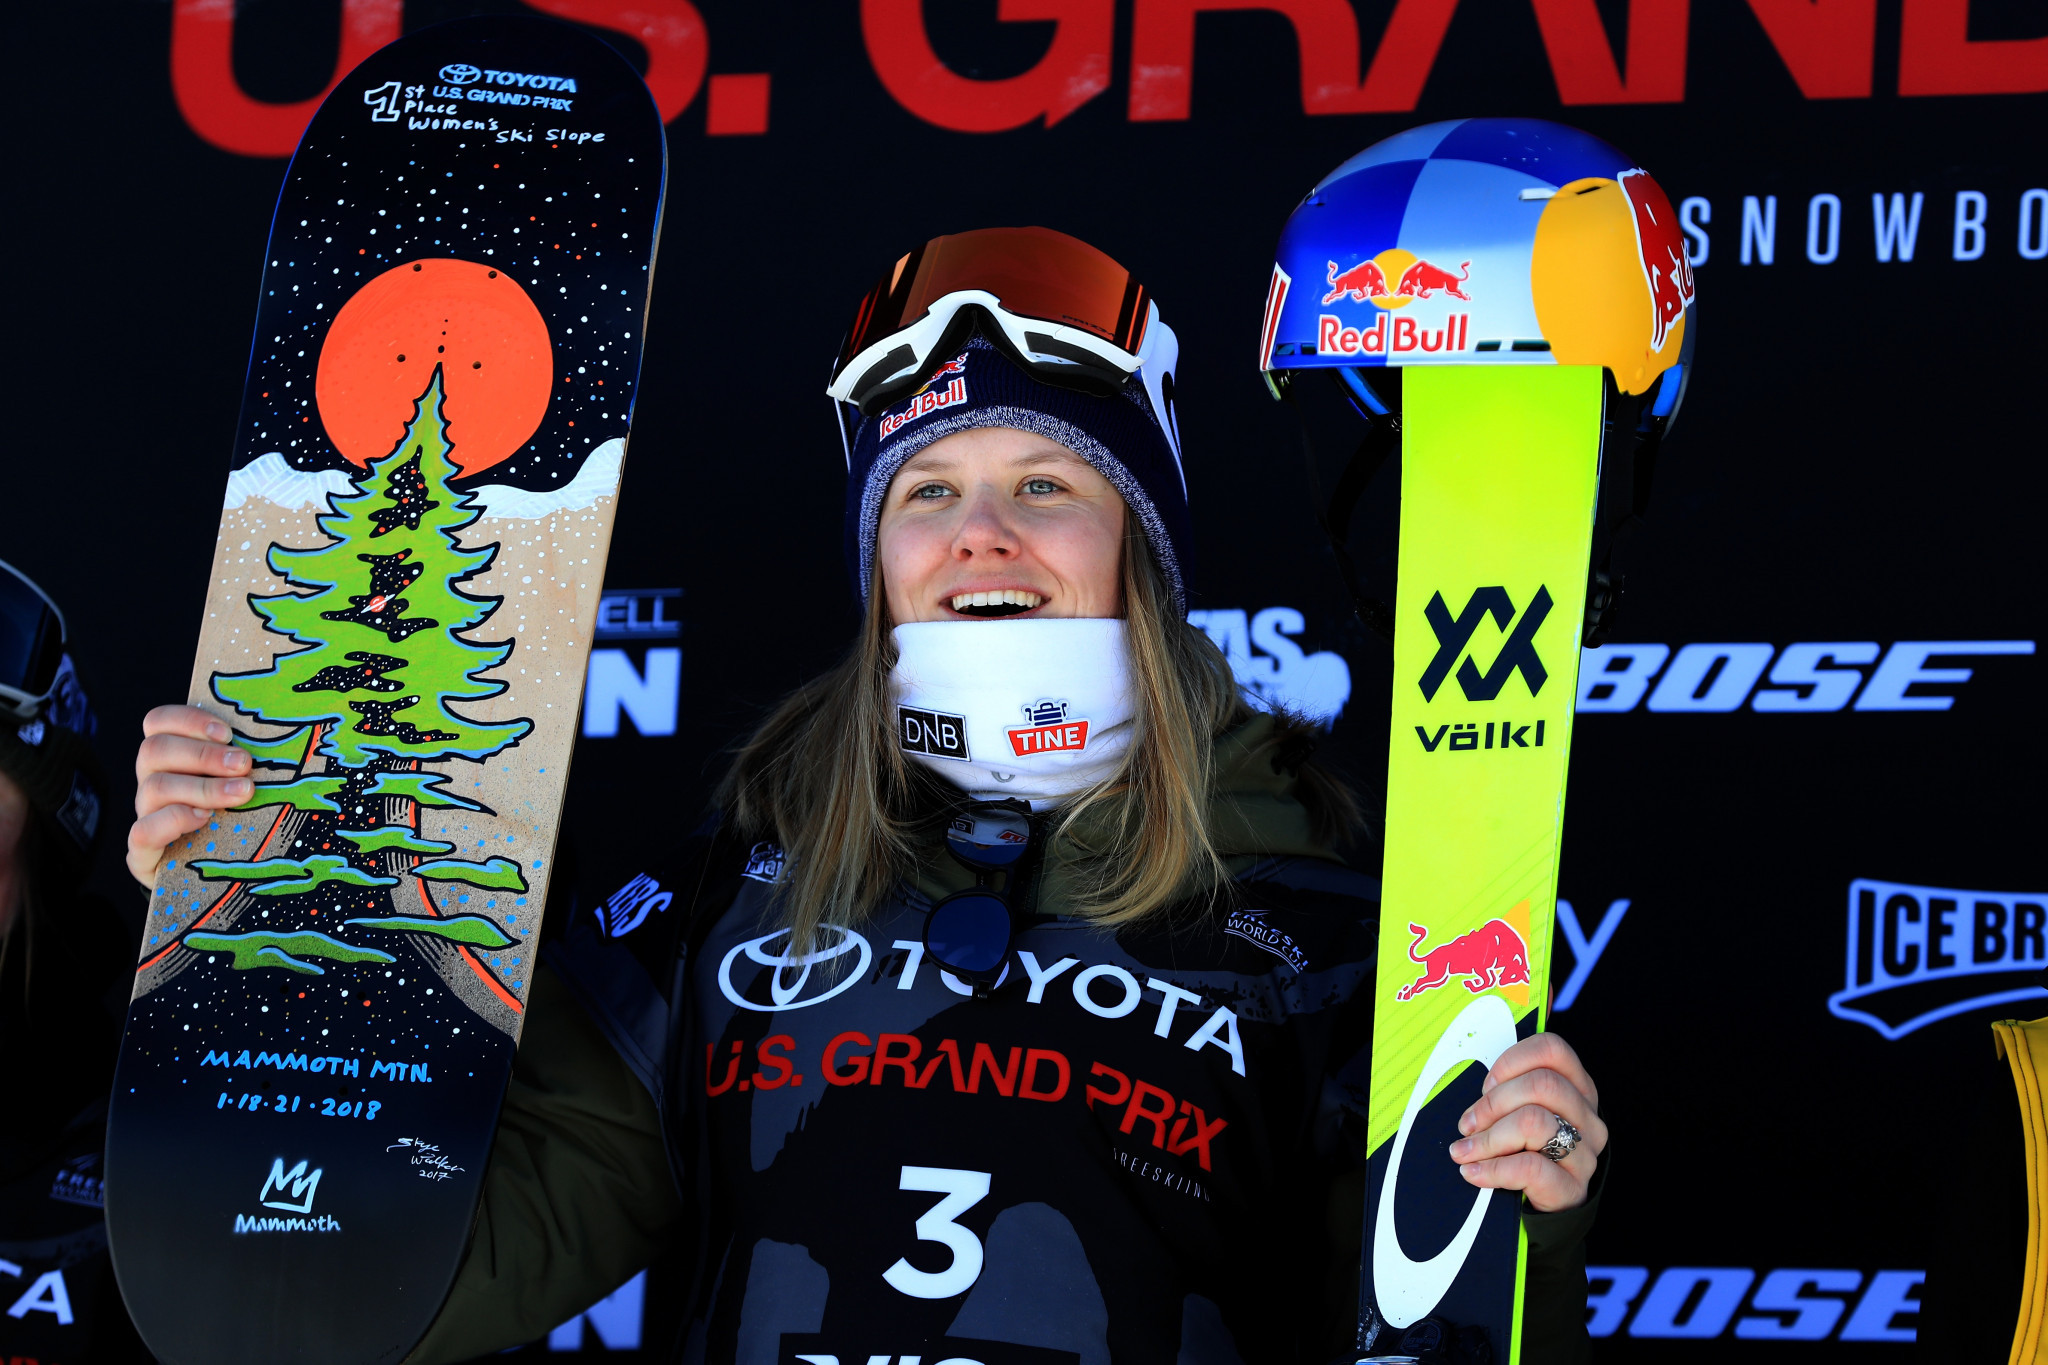 Tiril Sjaastad Christiansen clinched her first win since an injury lay-off ©Getty Images 